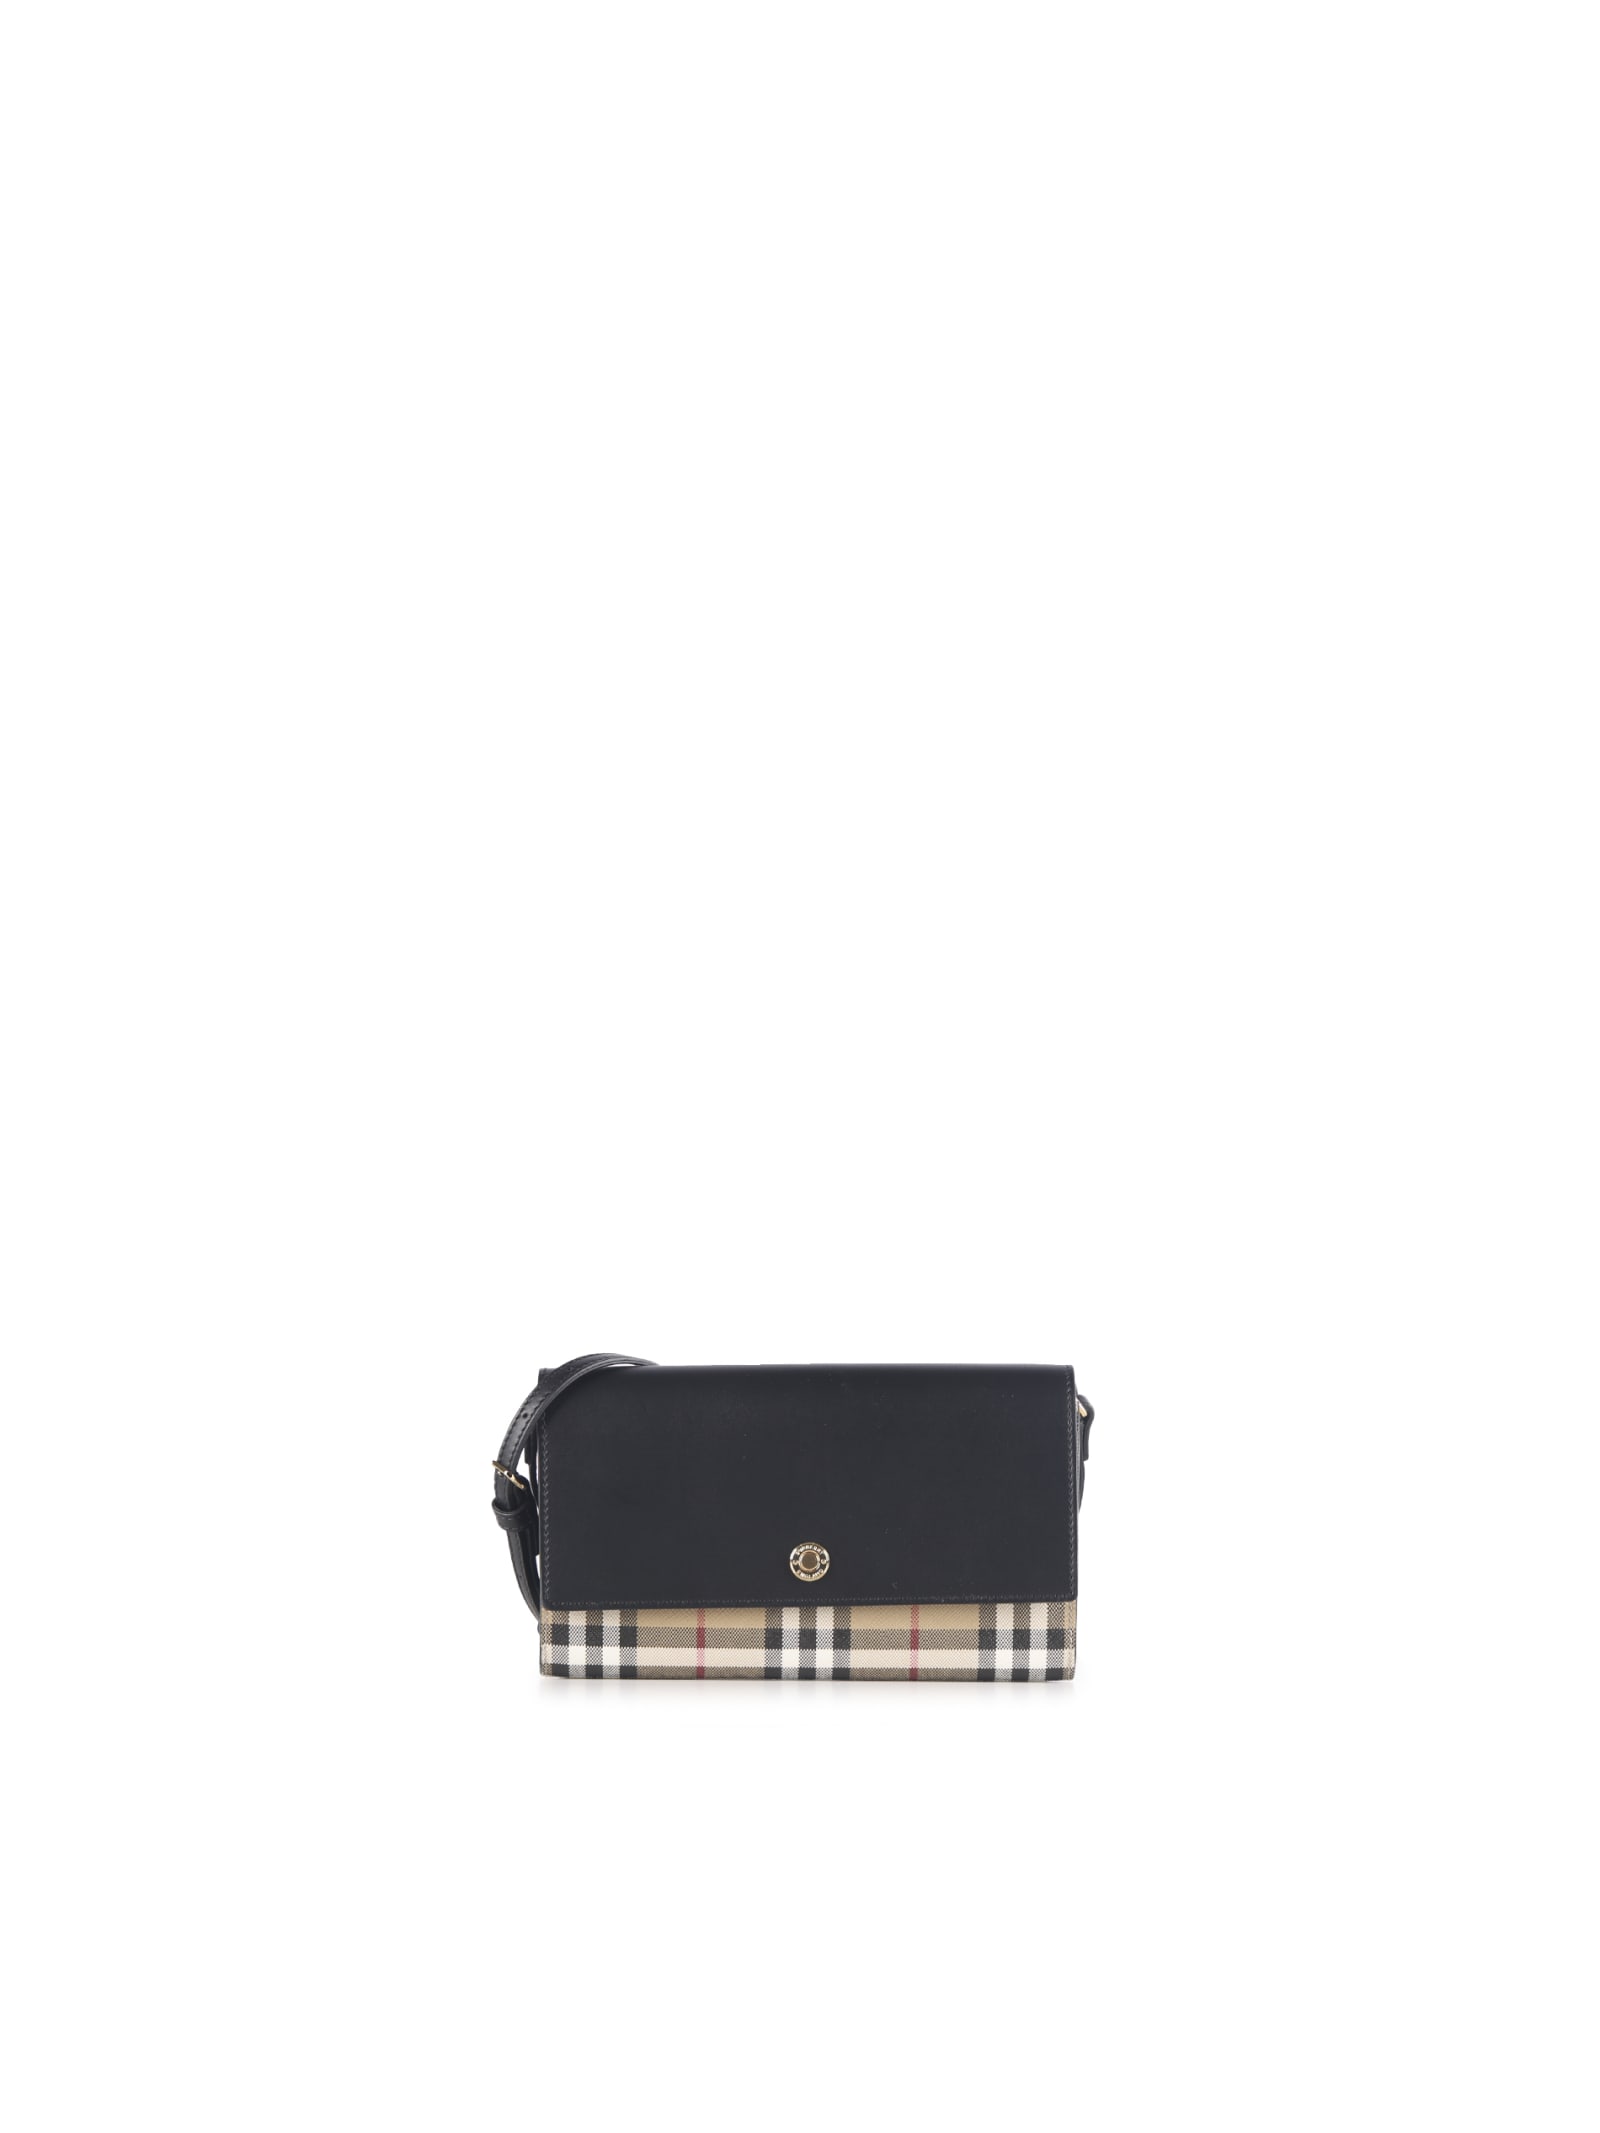 Burberry Check Printed Wallet With Shoulder Strap